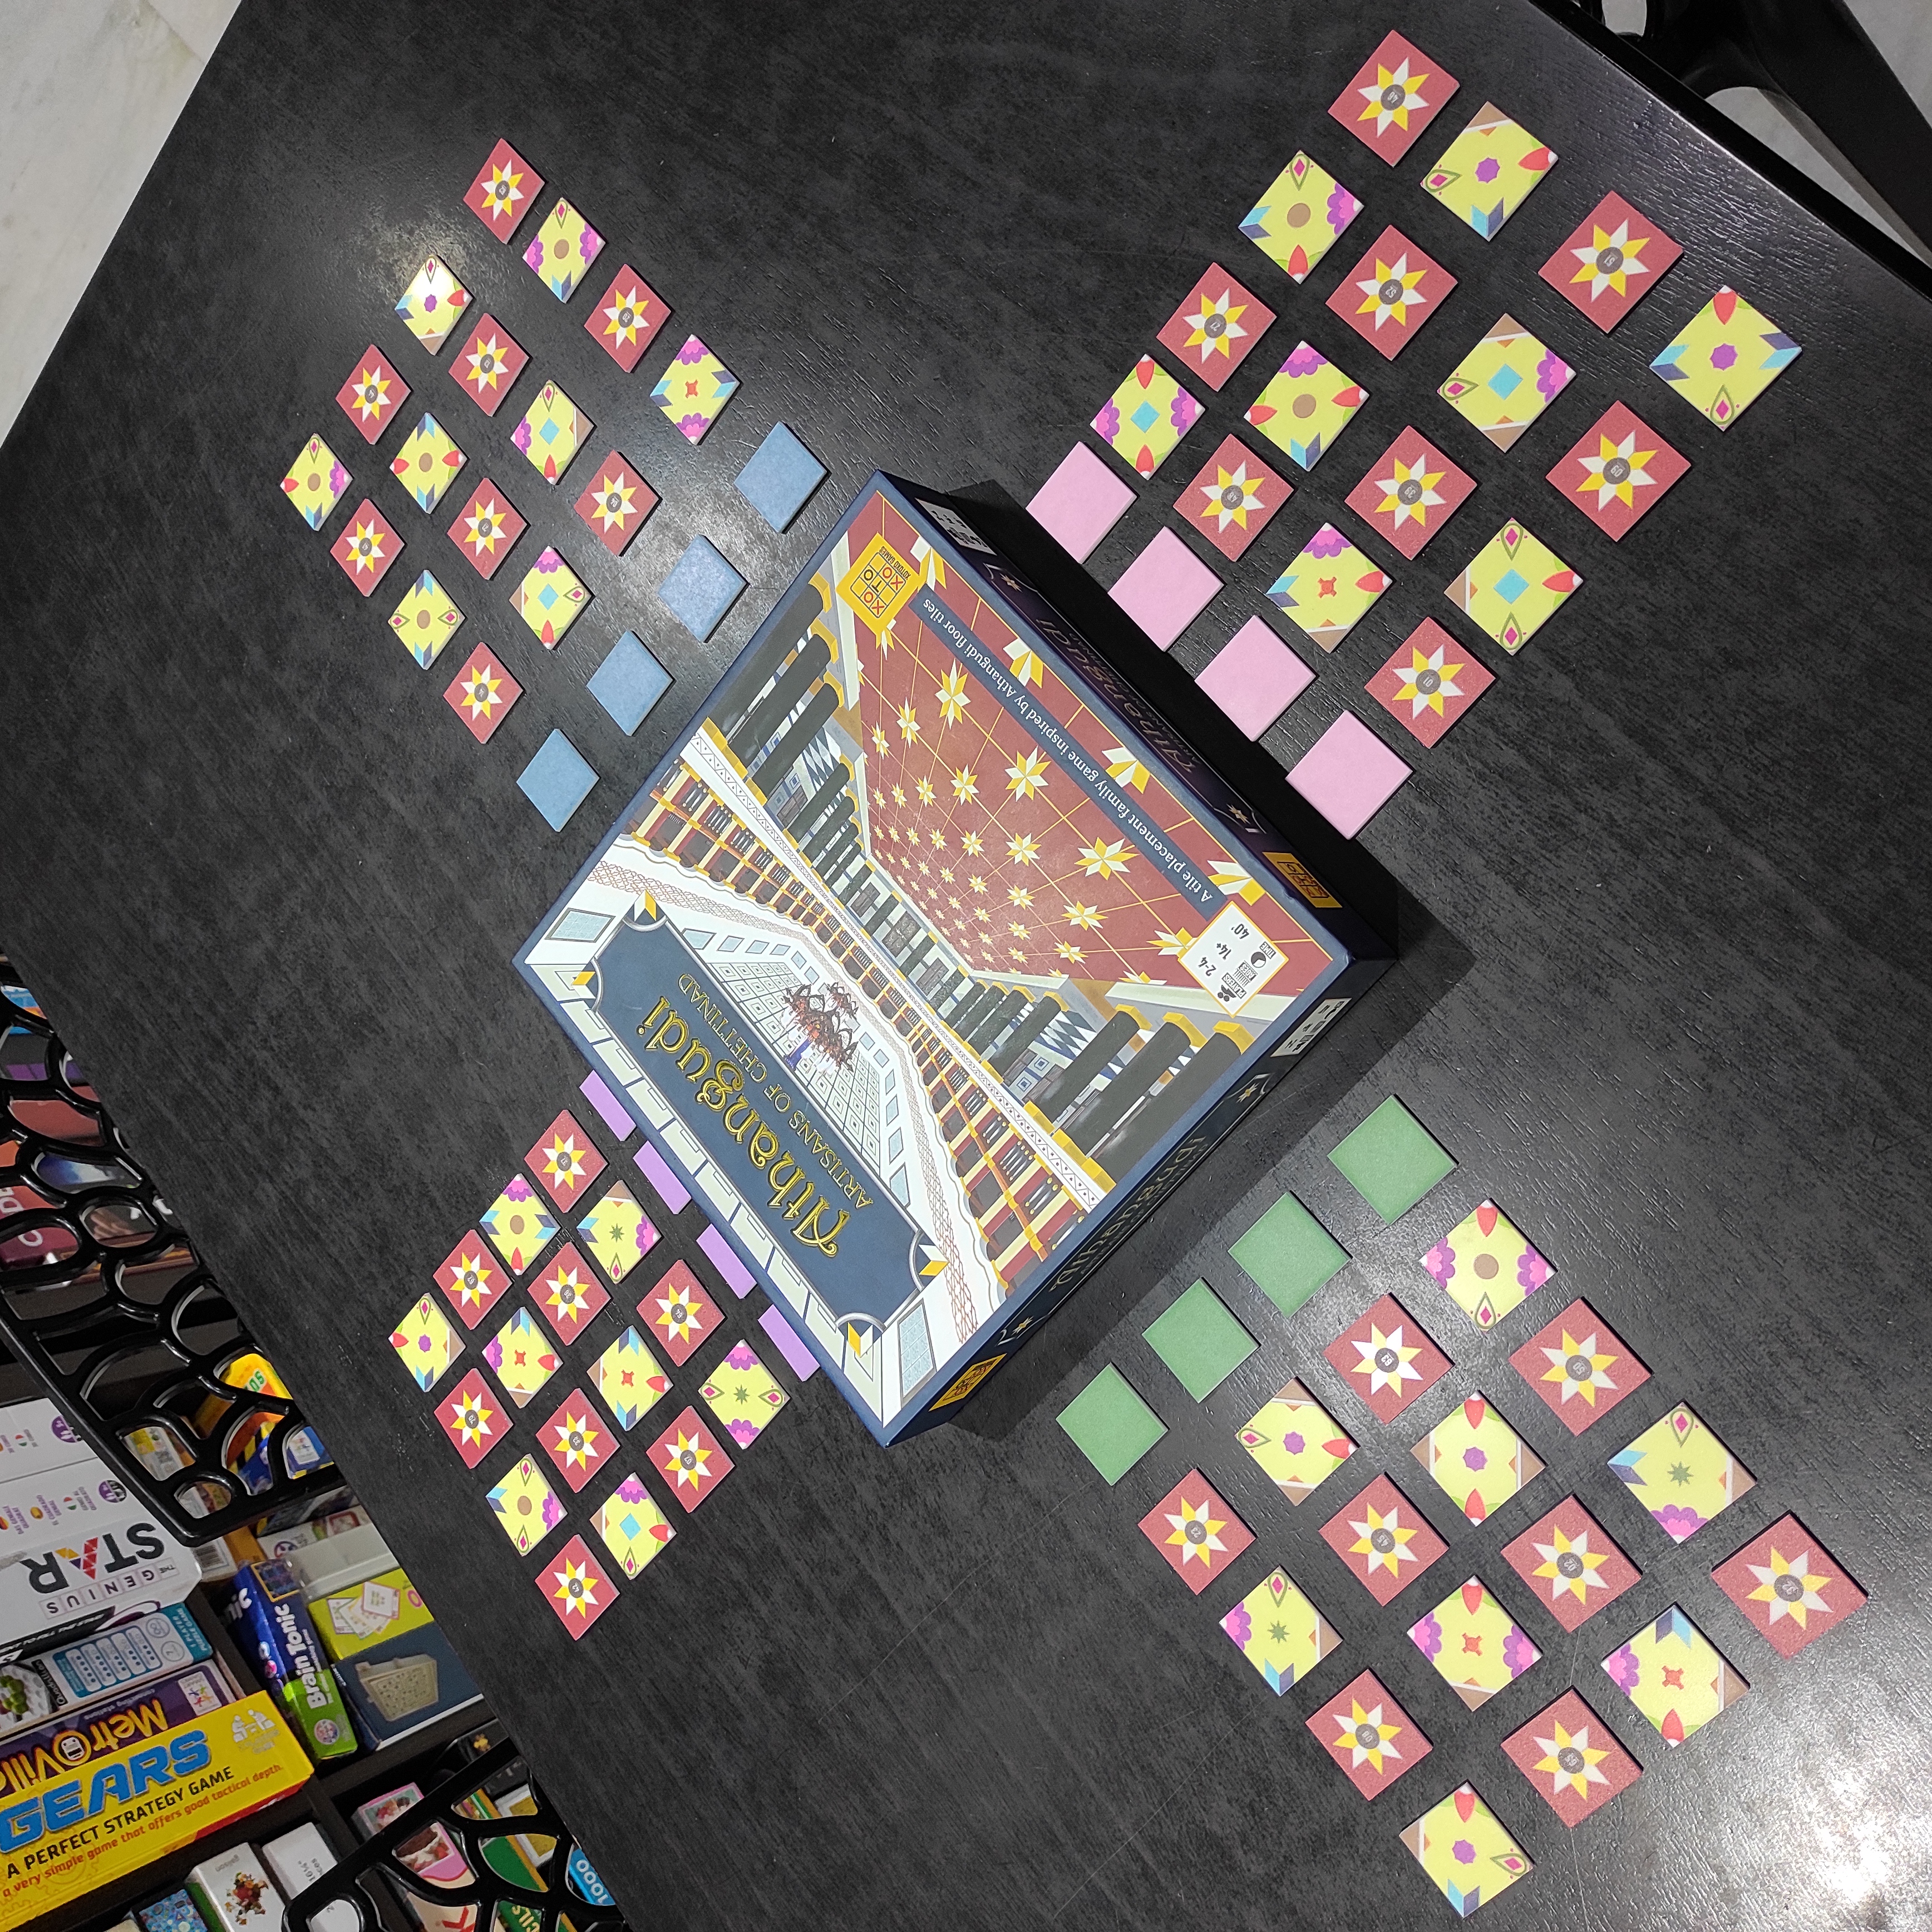 Picture shows the game Athangudi: Artisans of Chettinad laid out on a table in the form of a cross. The Box makes the center of the cross, while tiles from the game are arranged in 4 columns to make up each of the arms of the cross. Some boardgames are visible in the background on a shelf.